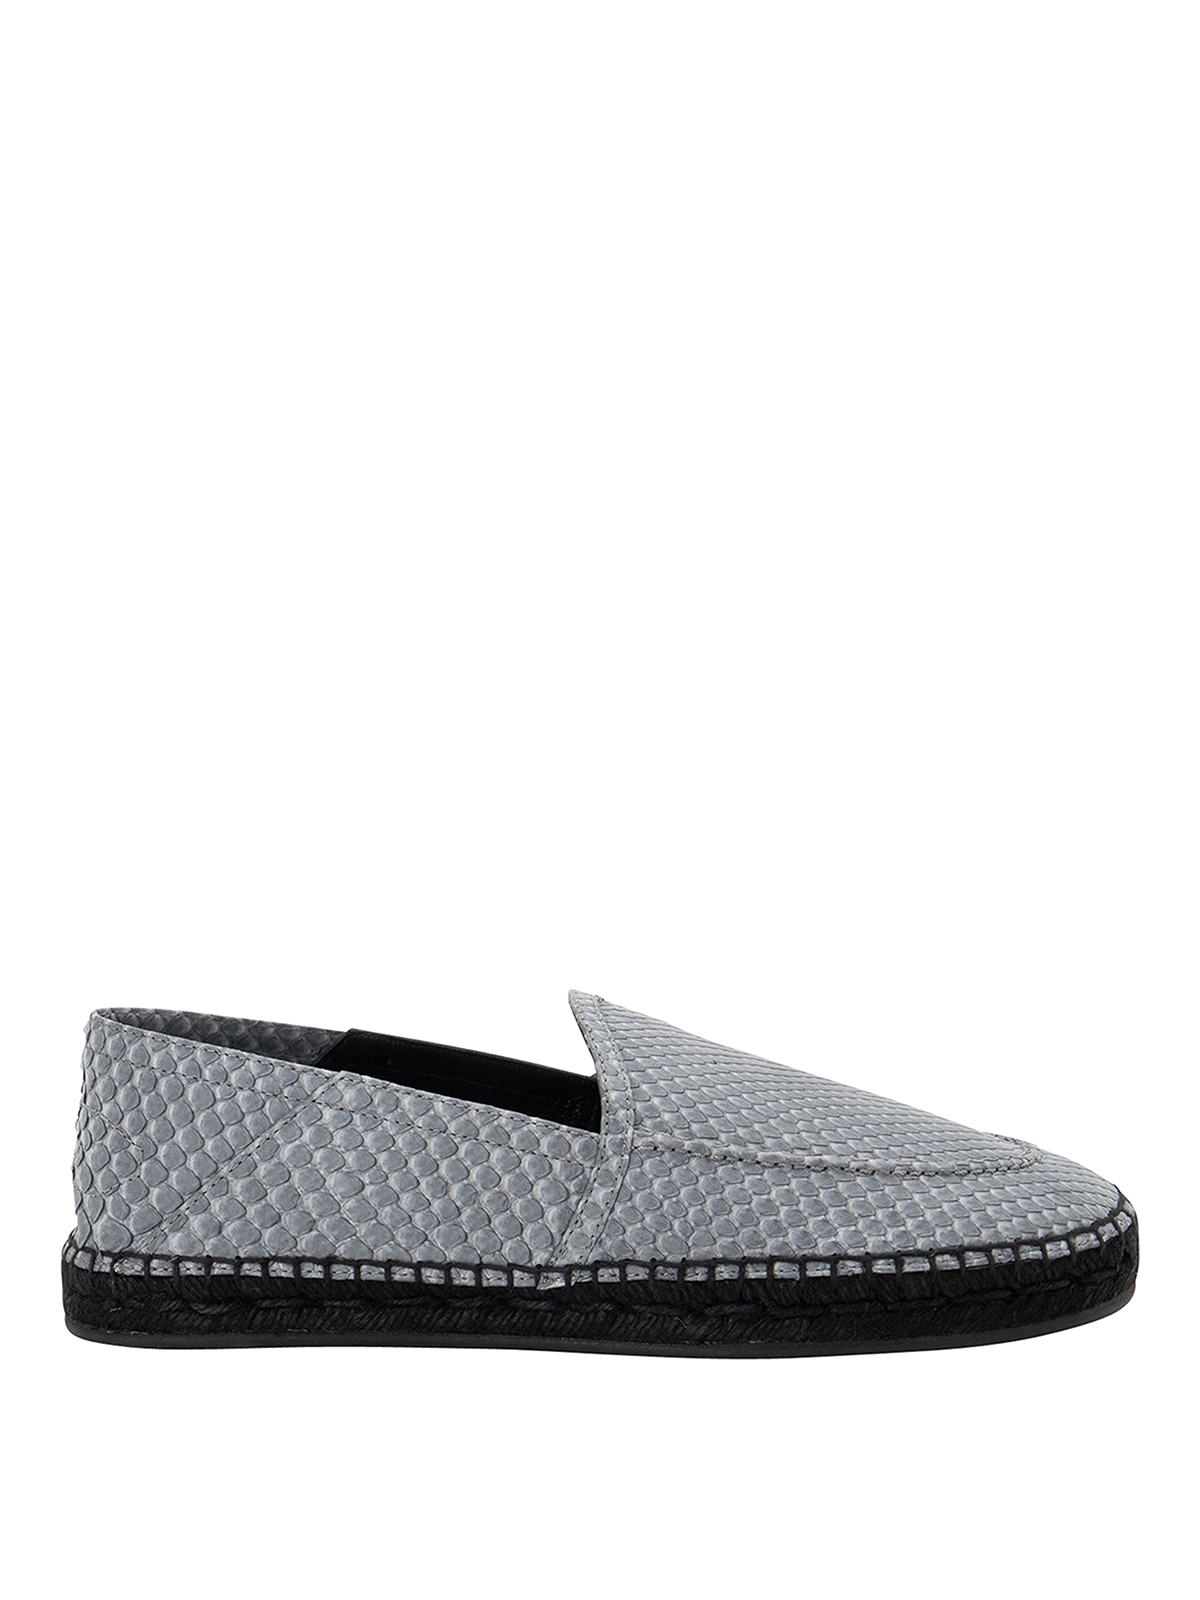 Brioni Piton Effect Leather Slippers In Grey